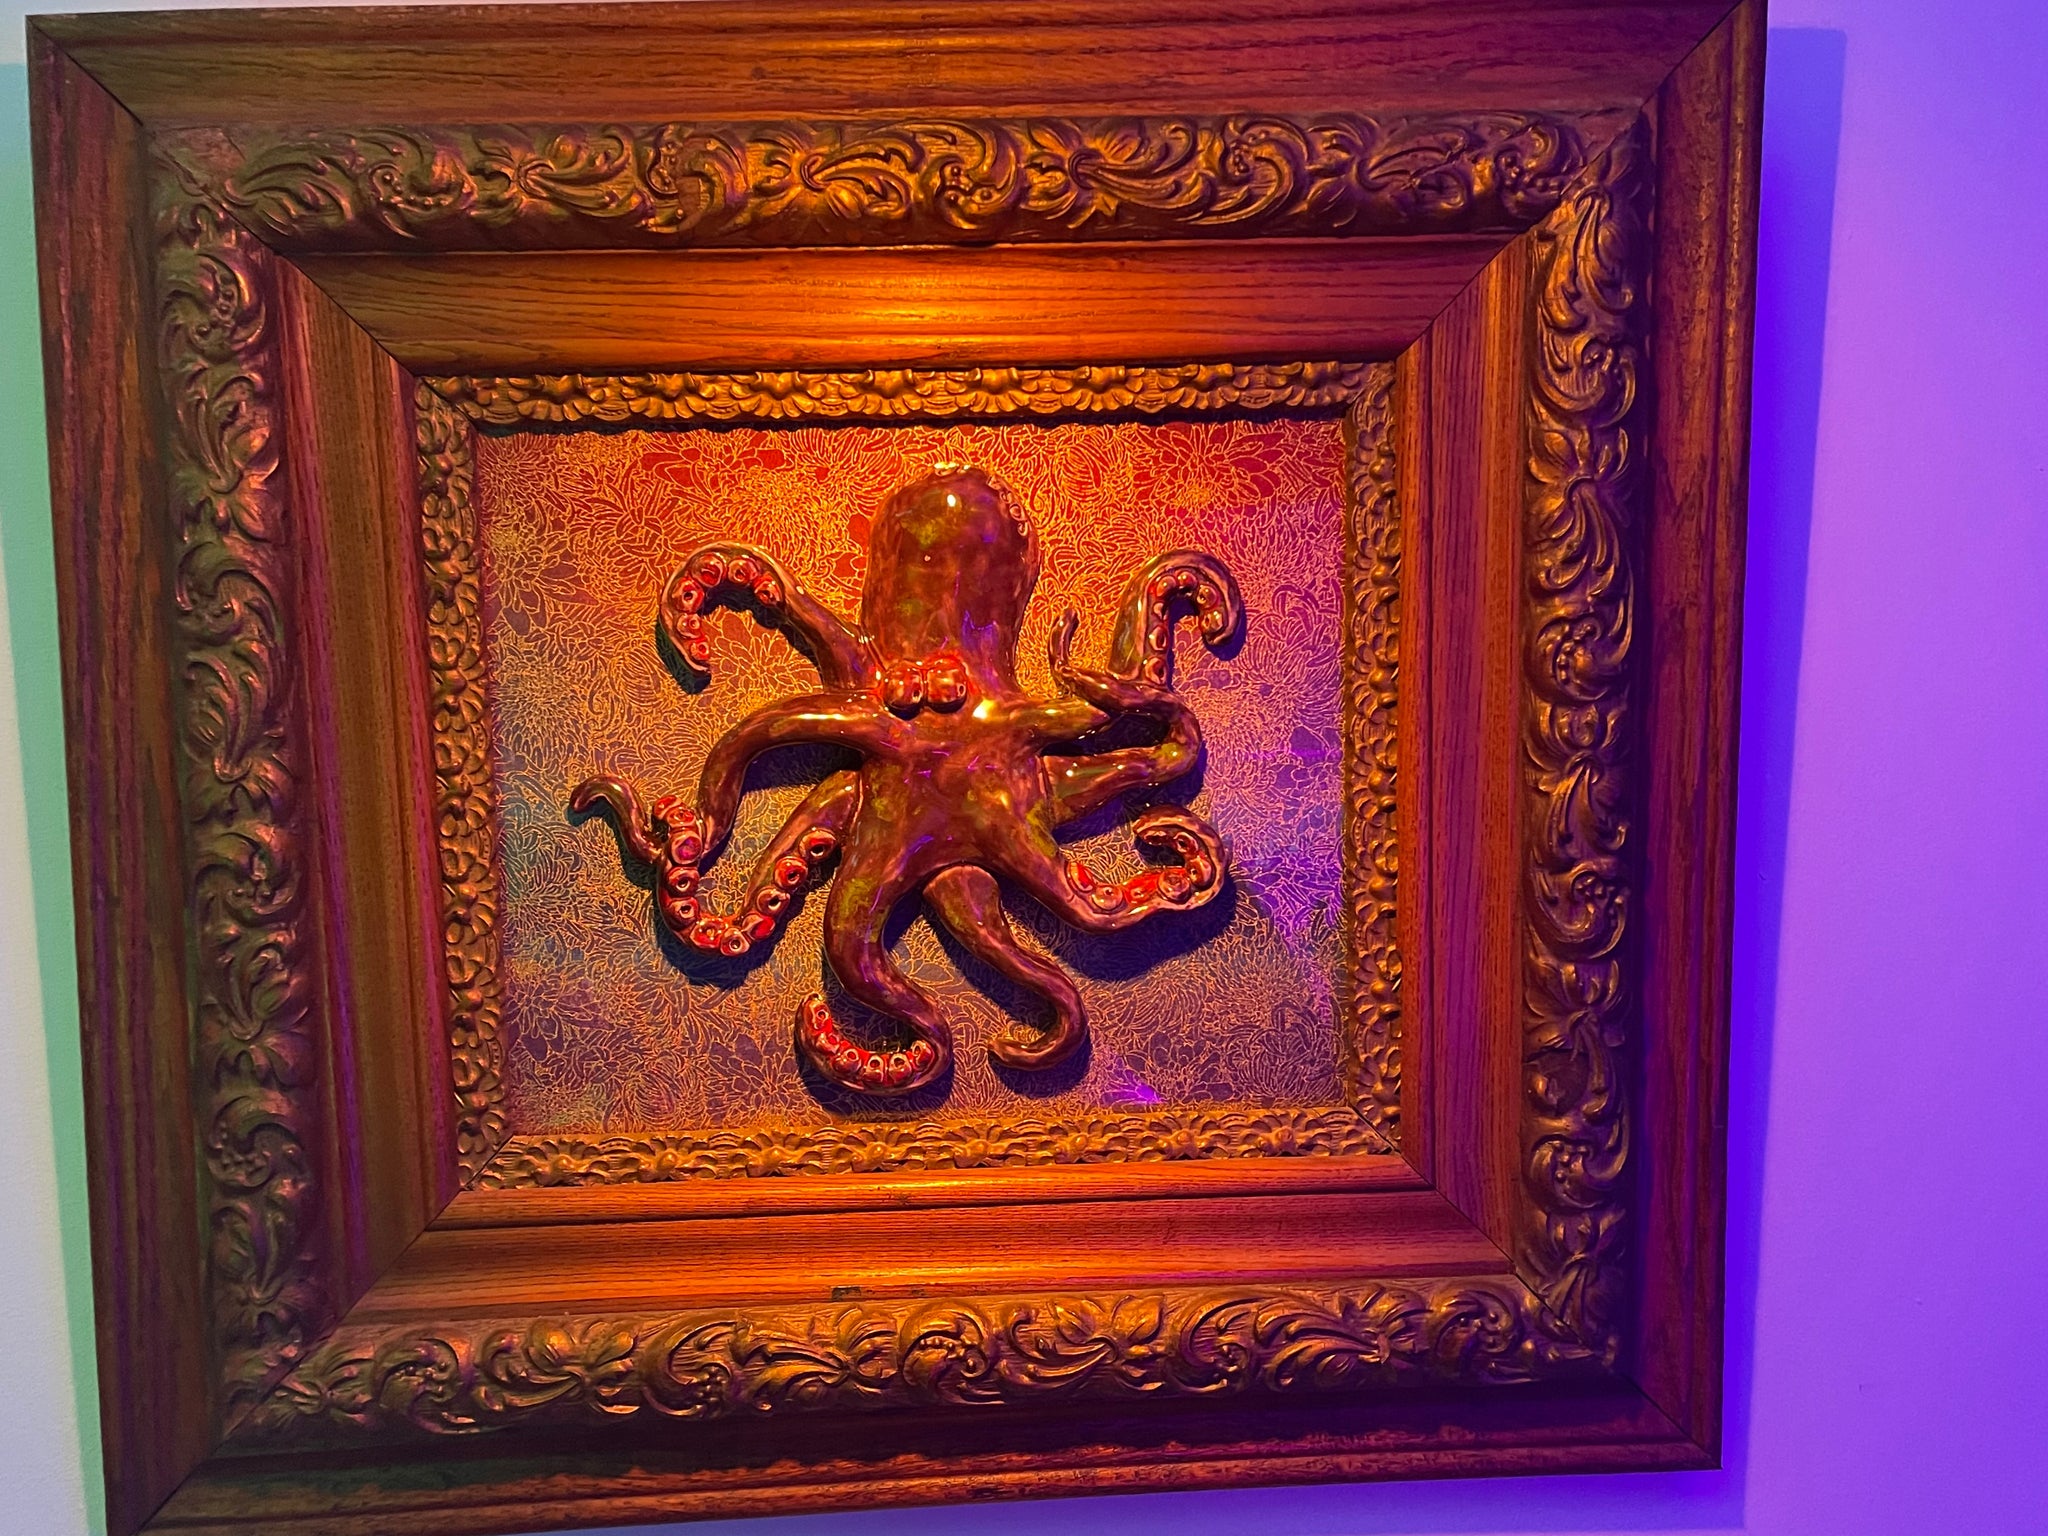 Purple Octopus on Thai Fabric and antique frame